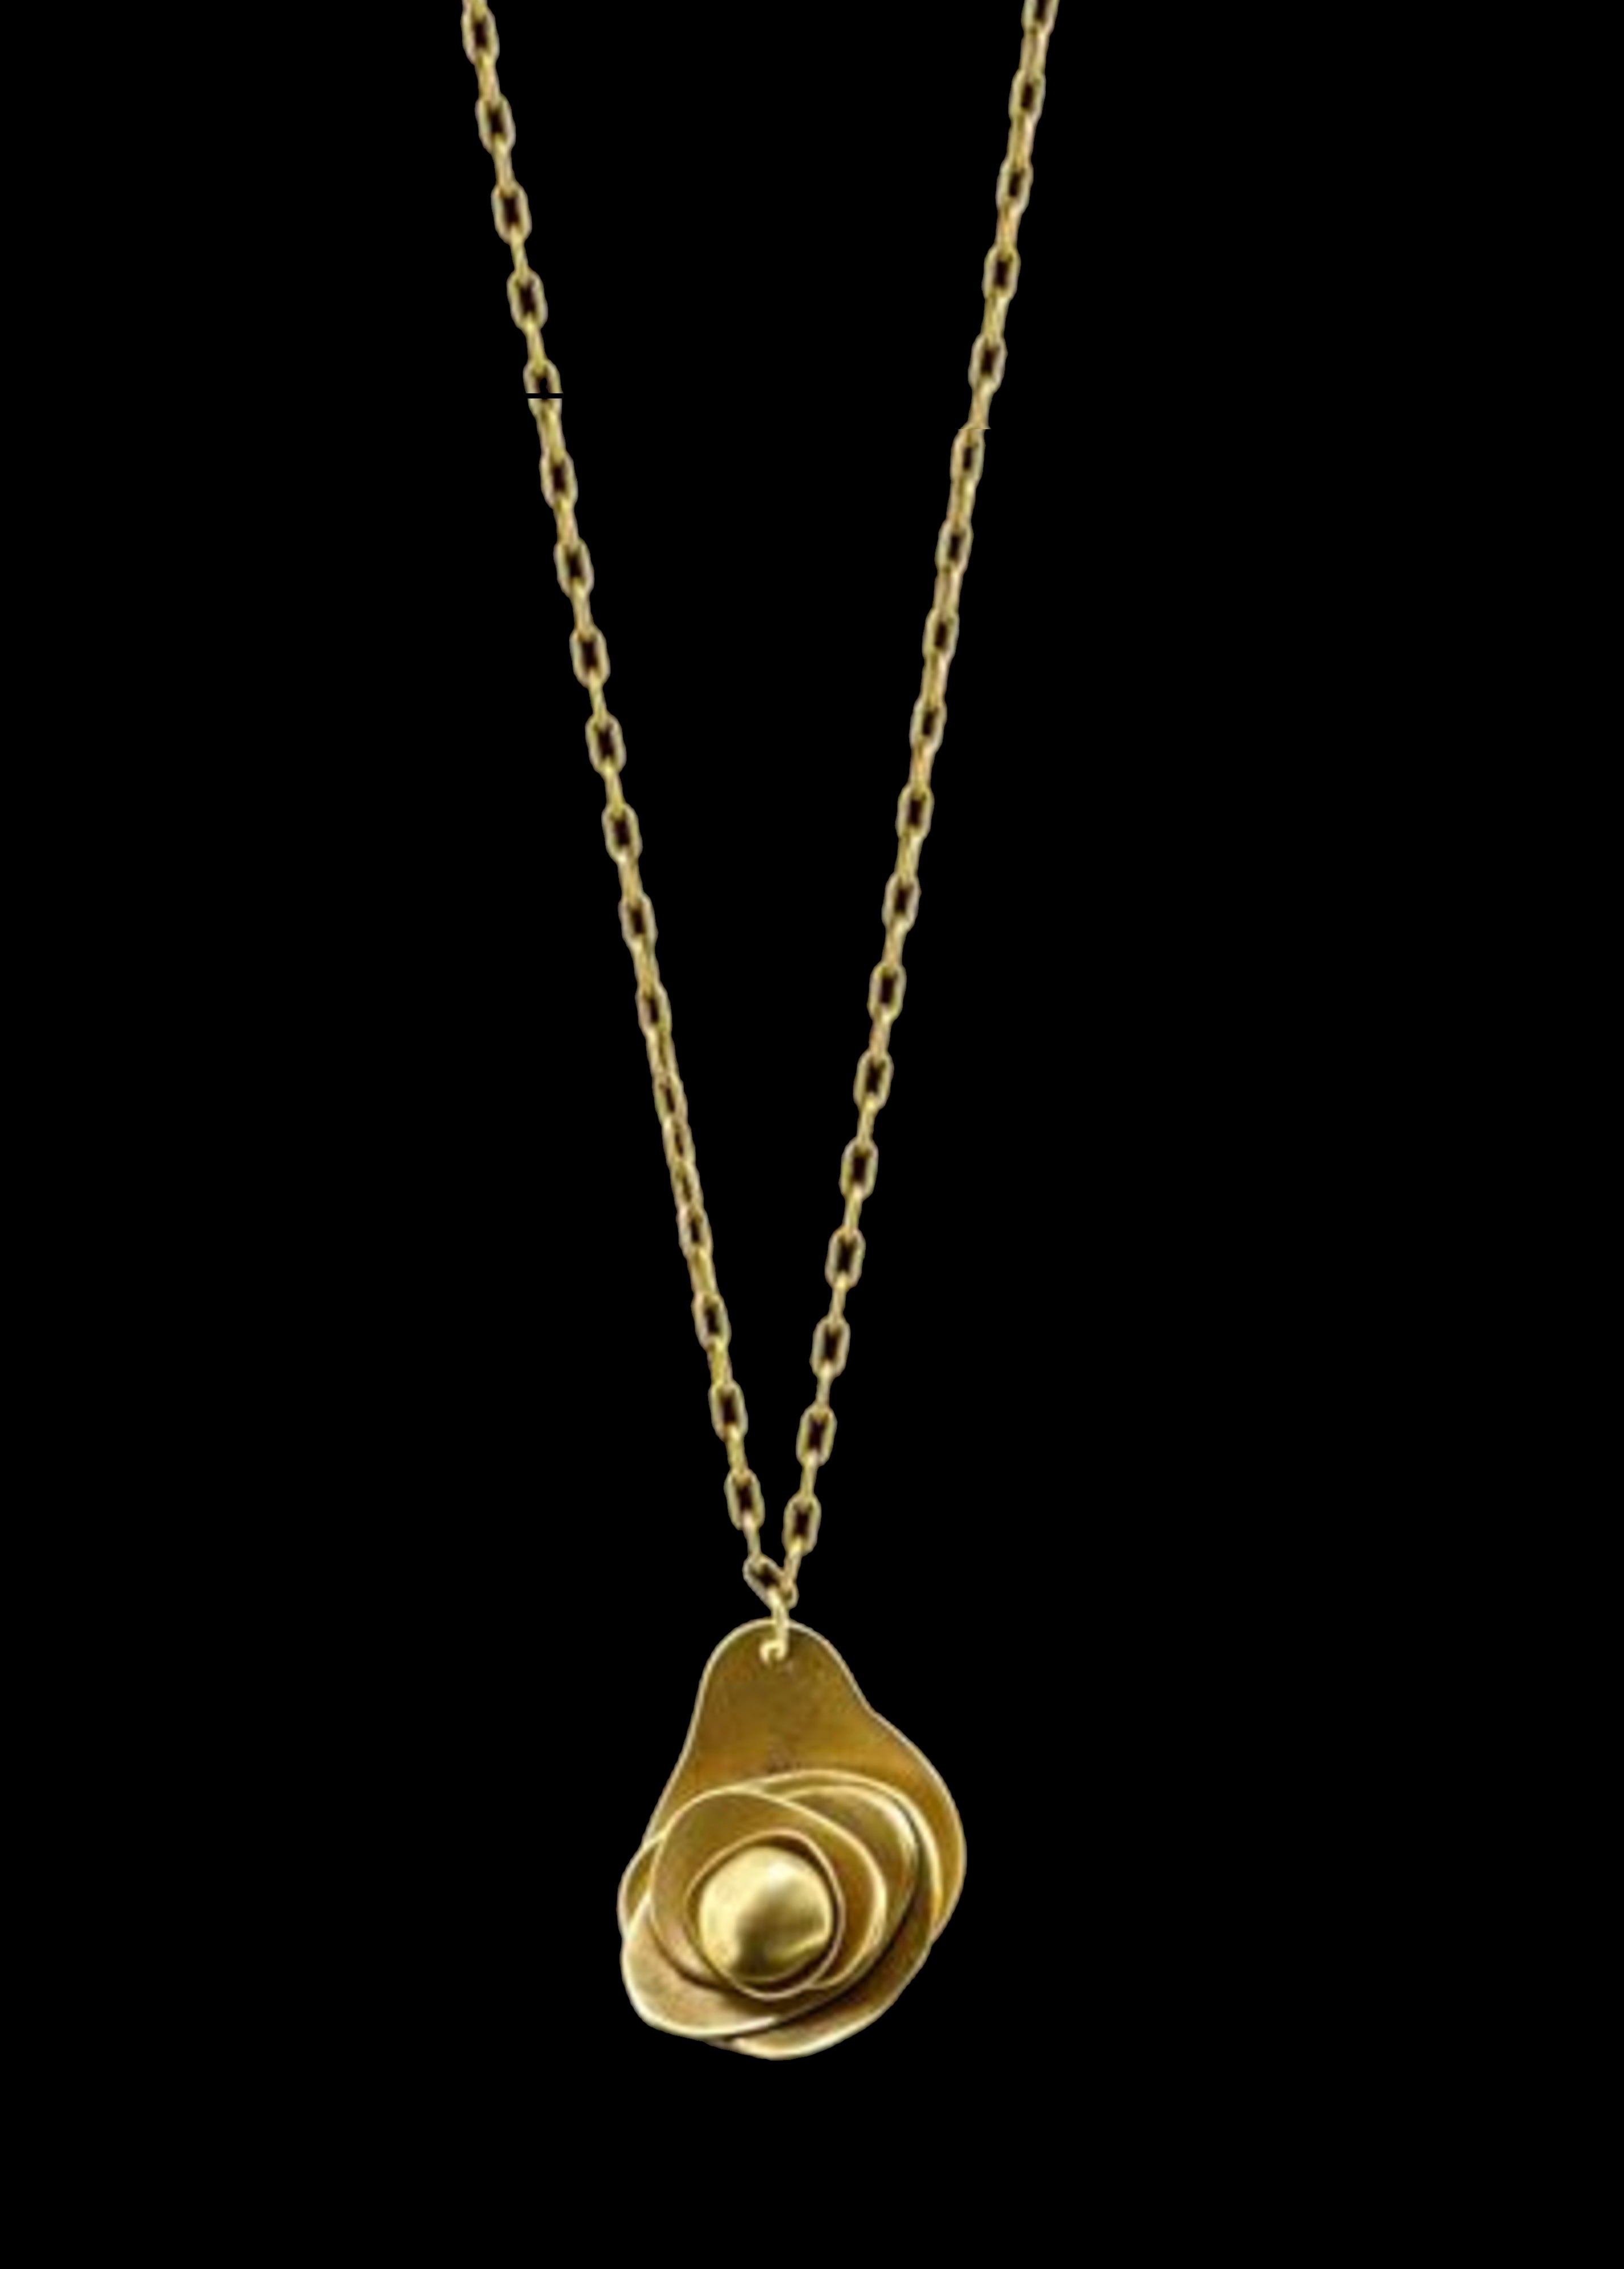 Cabbage Rose Pendant Necklace